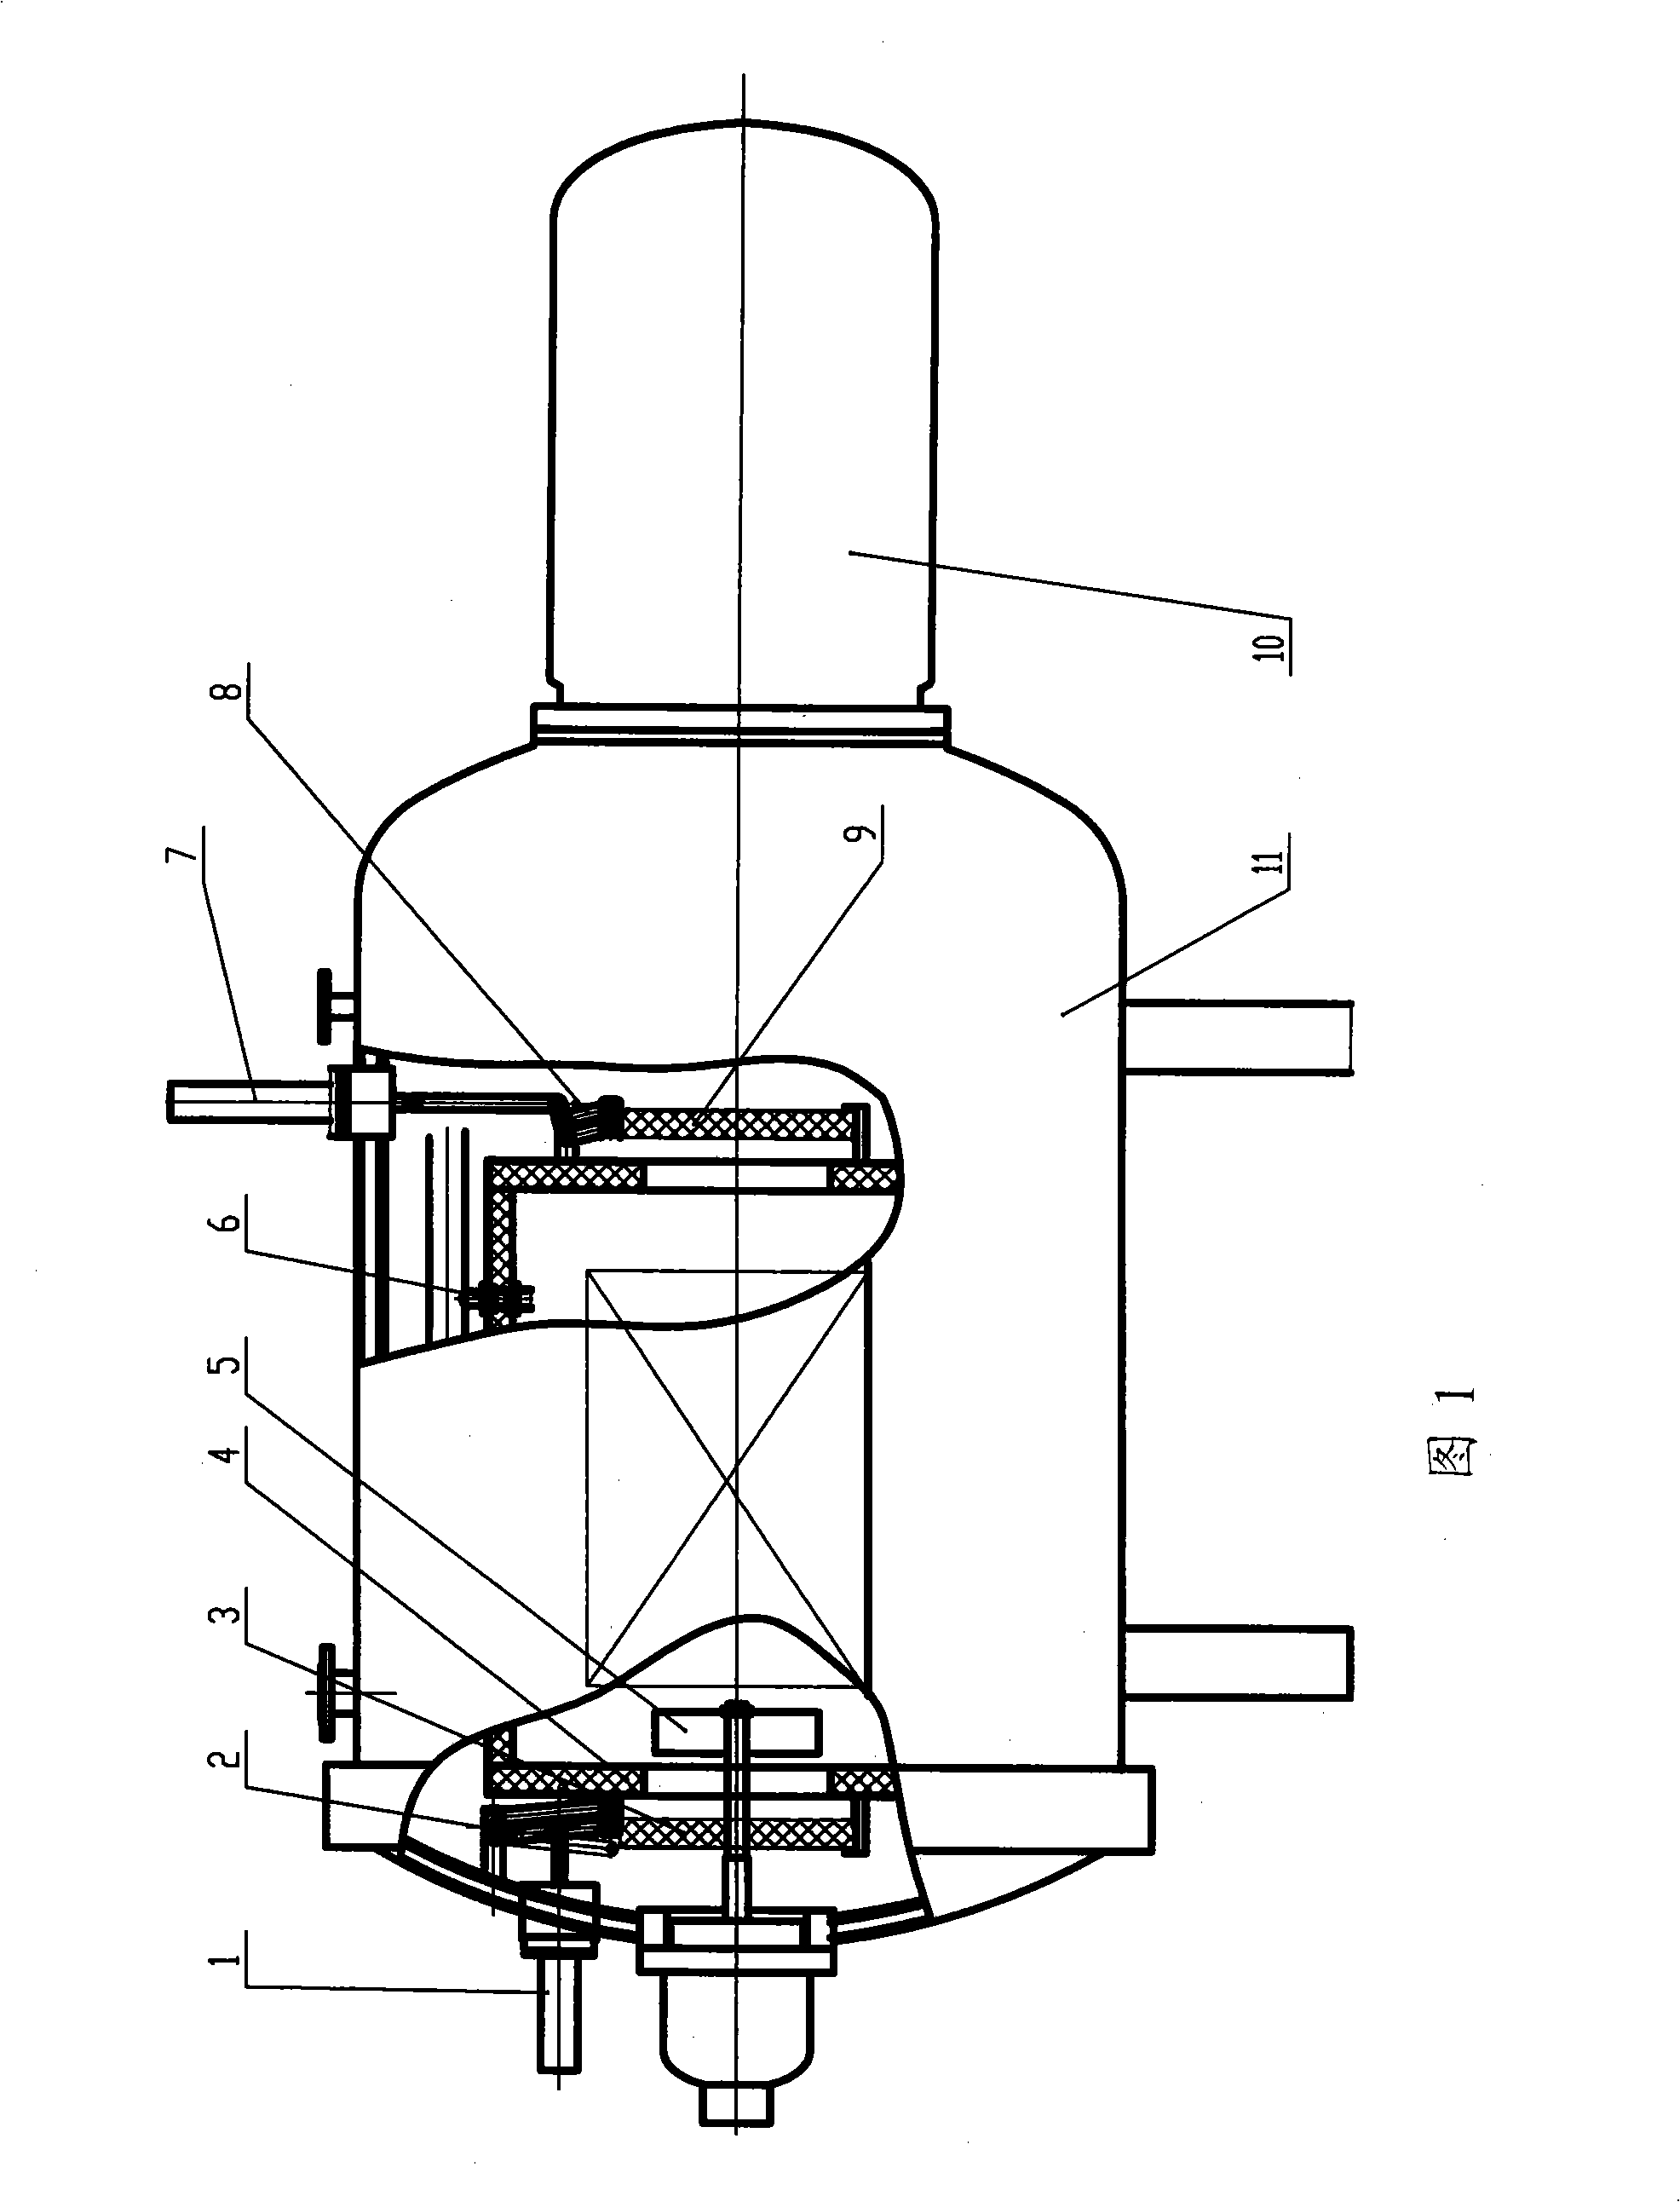 Nozzle cooling vacuum gas quenching furnace capable of convection heating